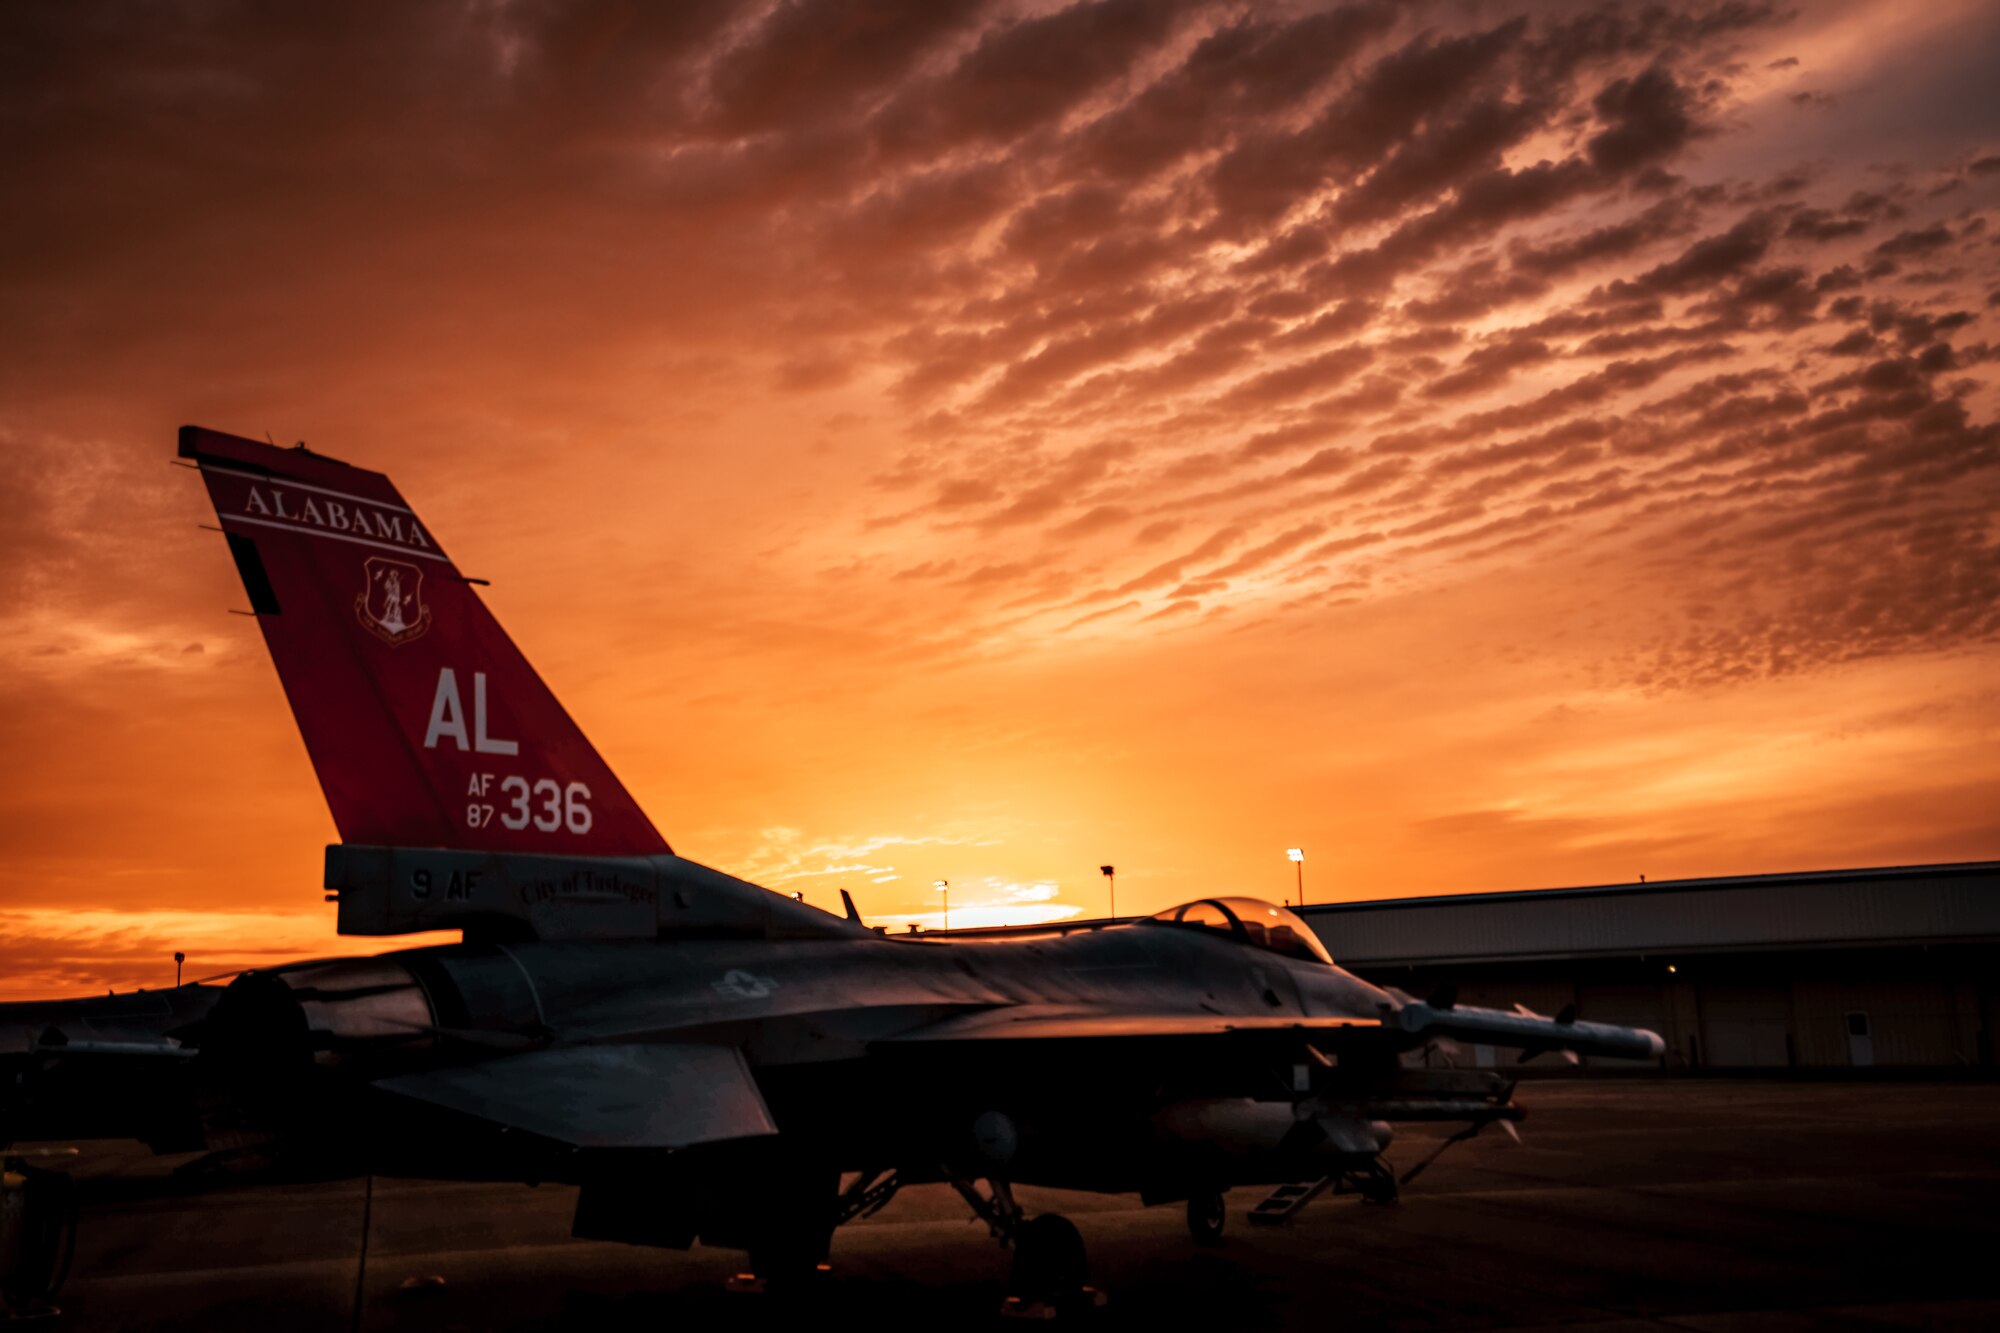 A crew chief from the 187th Fighter Wing prepares for an F-16C Fighting Falcon fighter aircraft to taxi and take off in Mobile, Alabama, during Southern Lightning Strike, an Agile Combat Employment exercise throughout the southeastern United States, November 4, 2021. The ACE construct is designed to provide optionality operationally throughout all domains, posturing the Department of Defense for strategic competition. (U.S. Air Force photo by Tech. Sgt. William Blankenship)